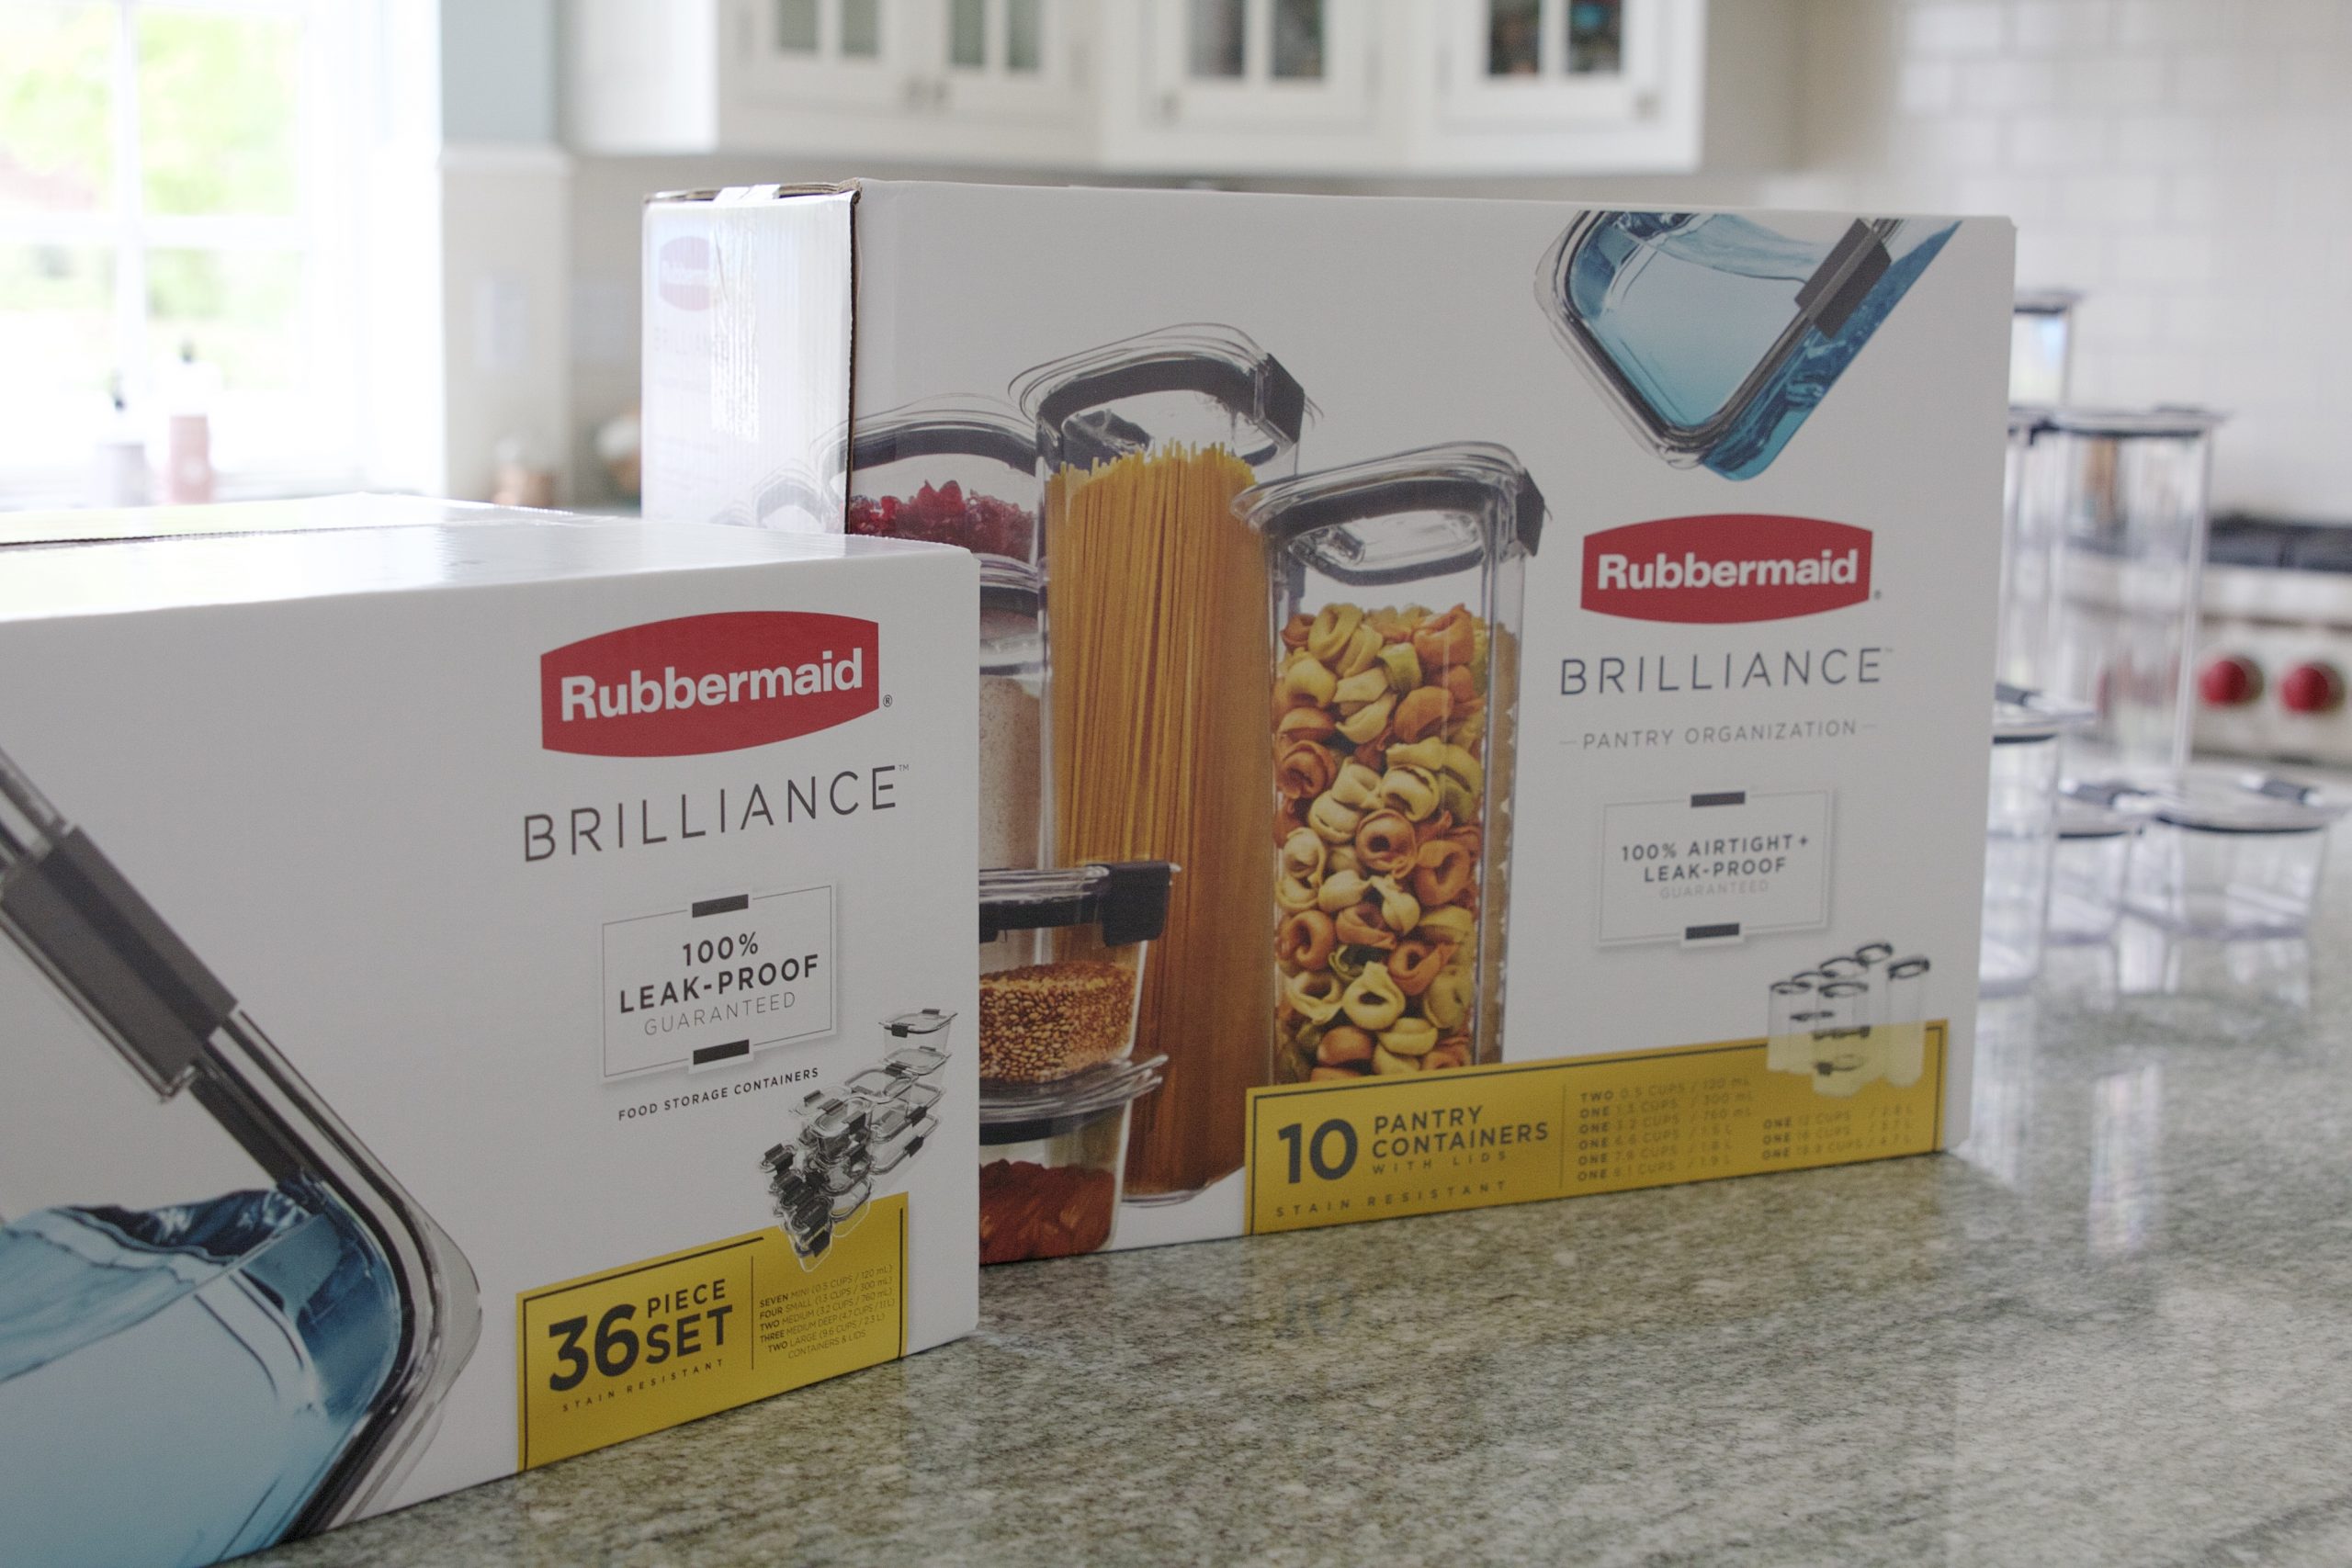 https://simplyorganized.me/wp-content/uploads/2020/04/rubbermaid-brillance-container-boxes-scaled.jpg